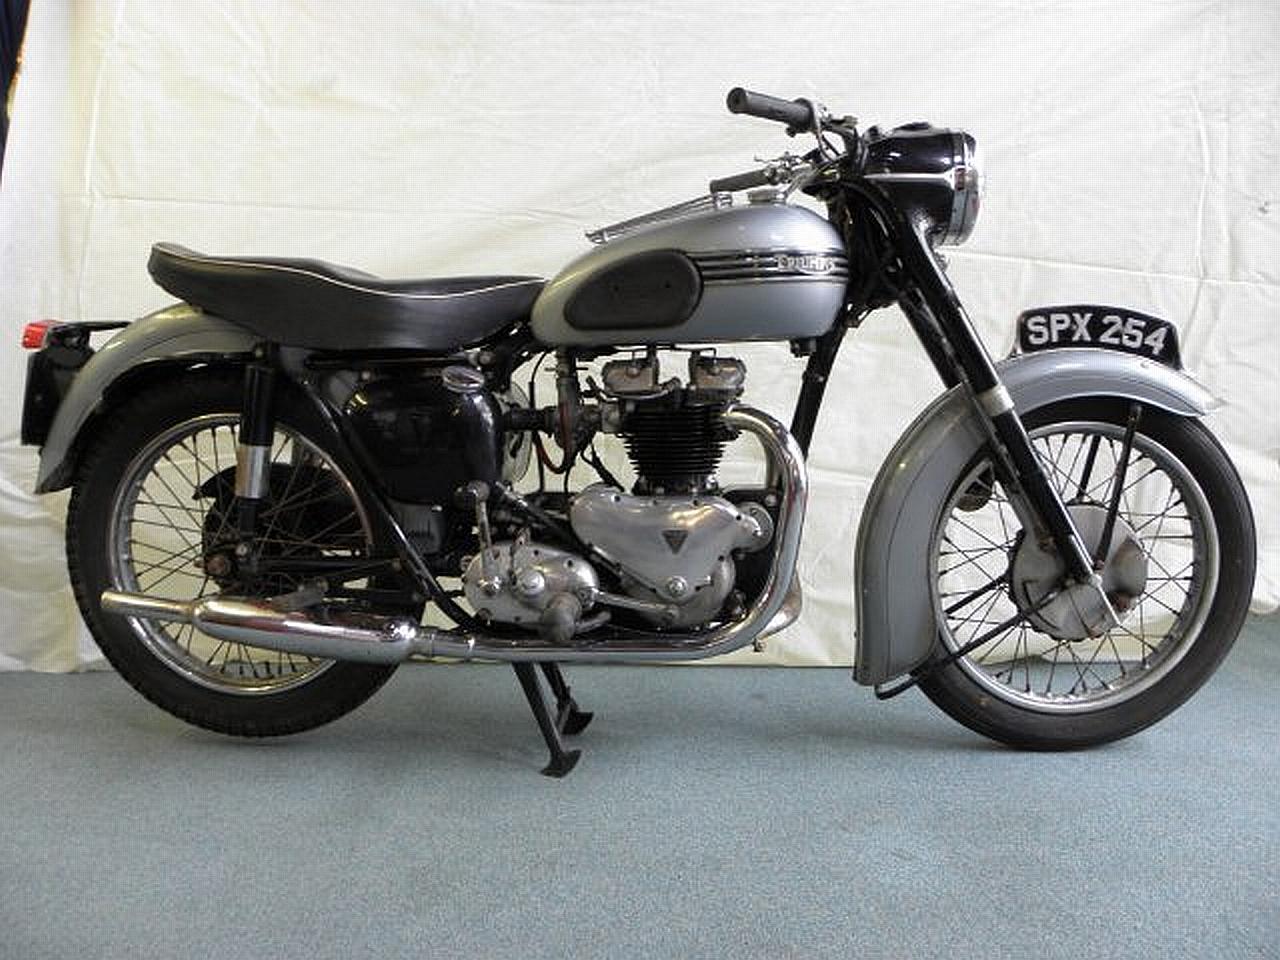 Bonhams Cars : One owner, 4,550 miles from new,1955 Triumph 649cc Tiger ...